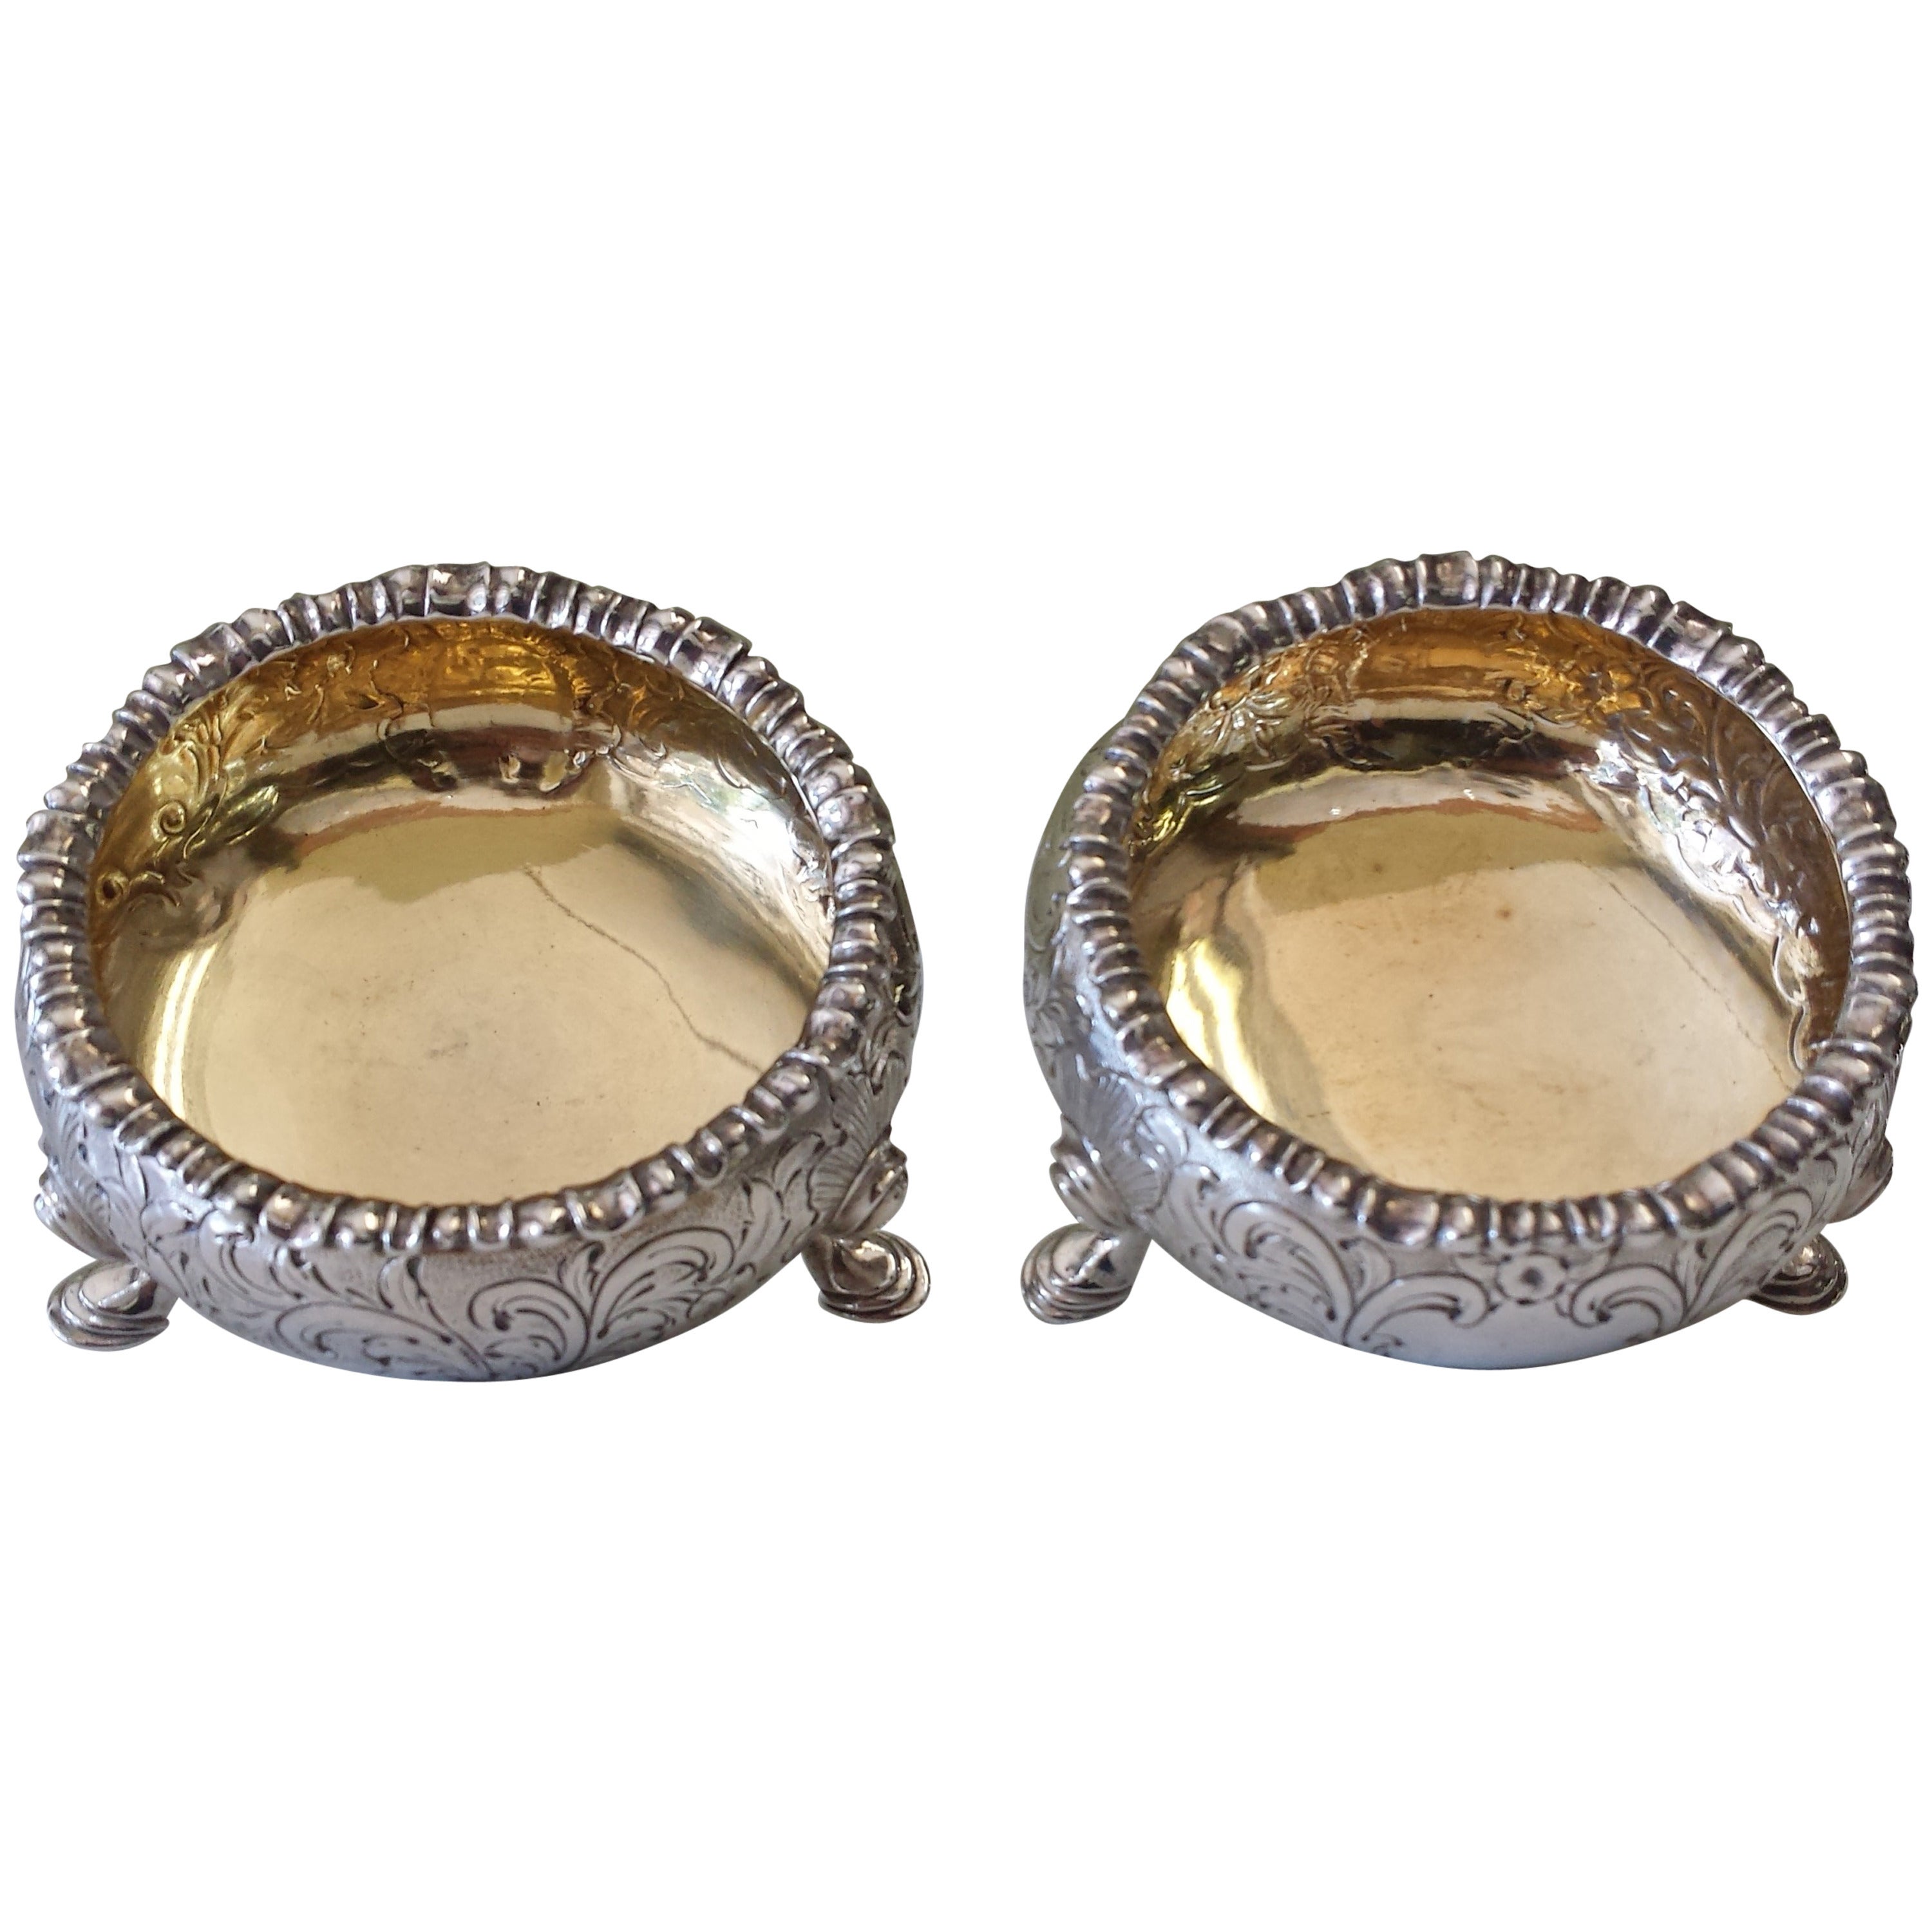 Sterling Silver and Gilt Pair of Open Salts by Robert Gray & Son, Glasgow 1847